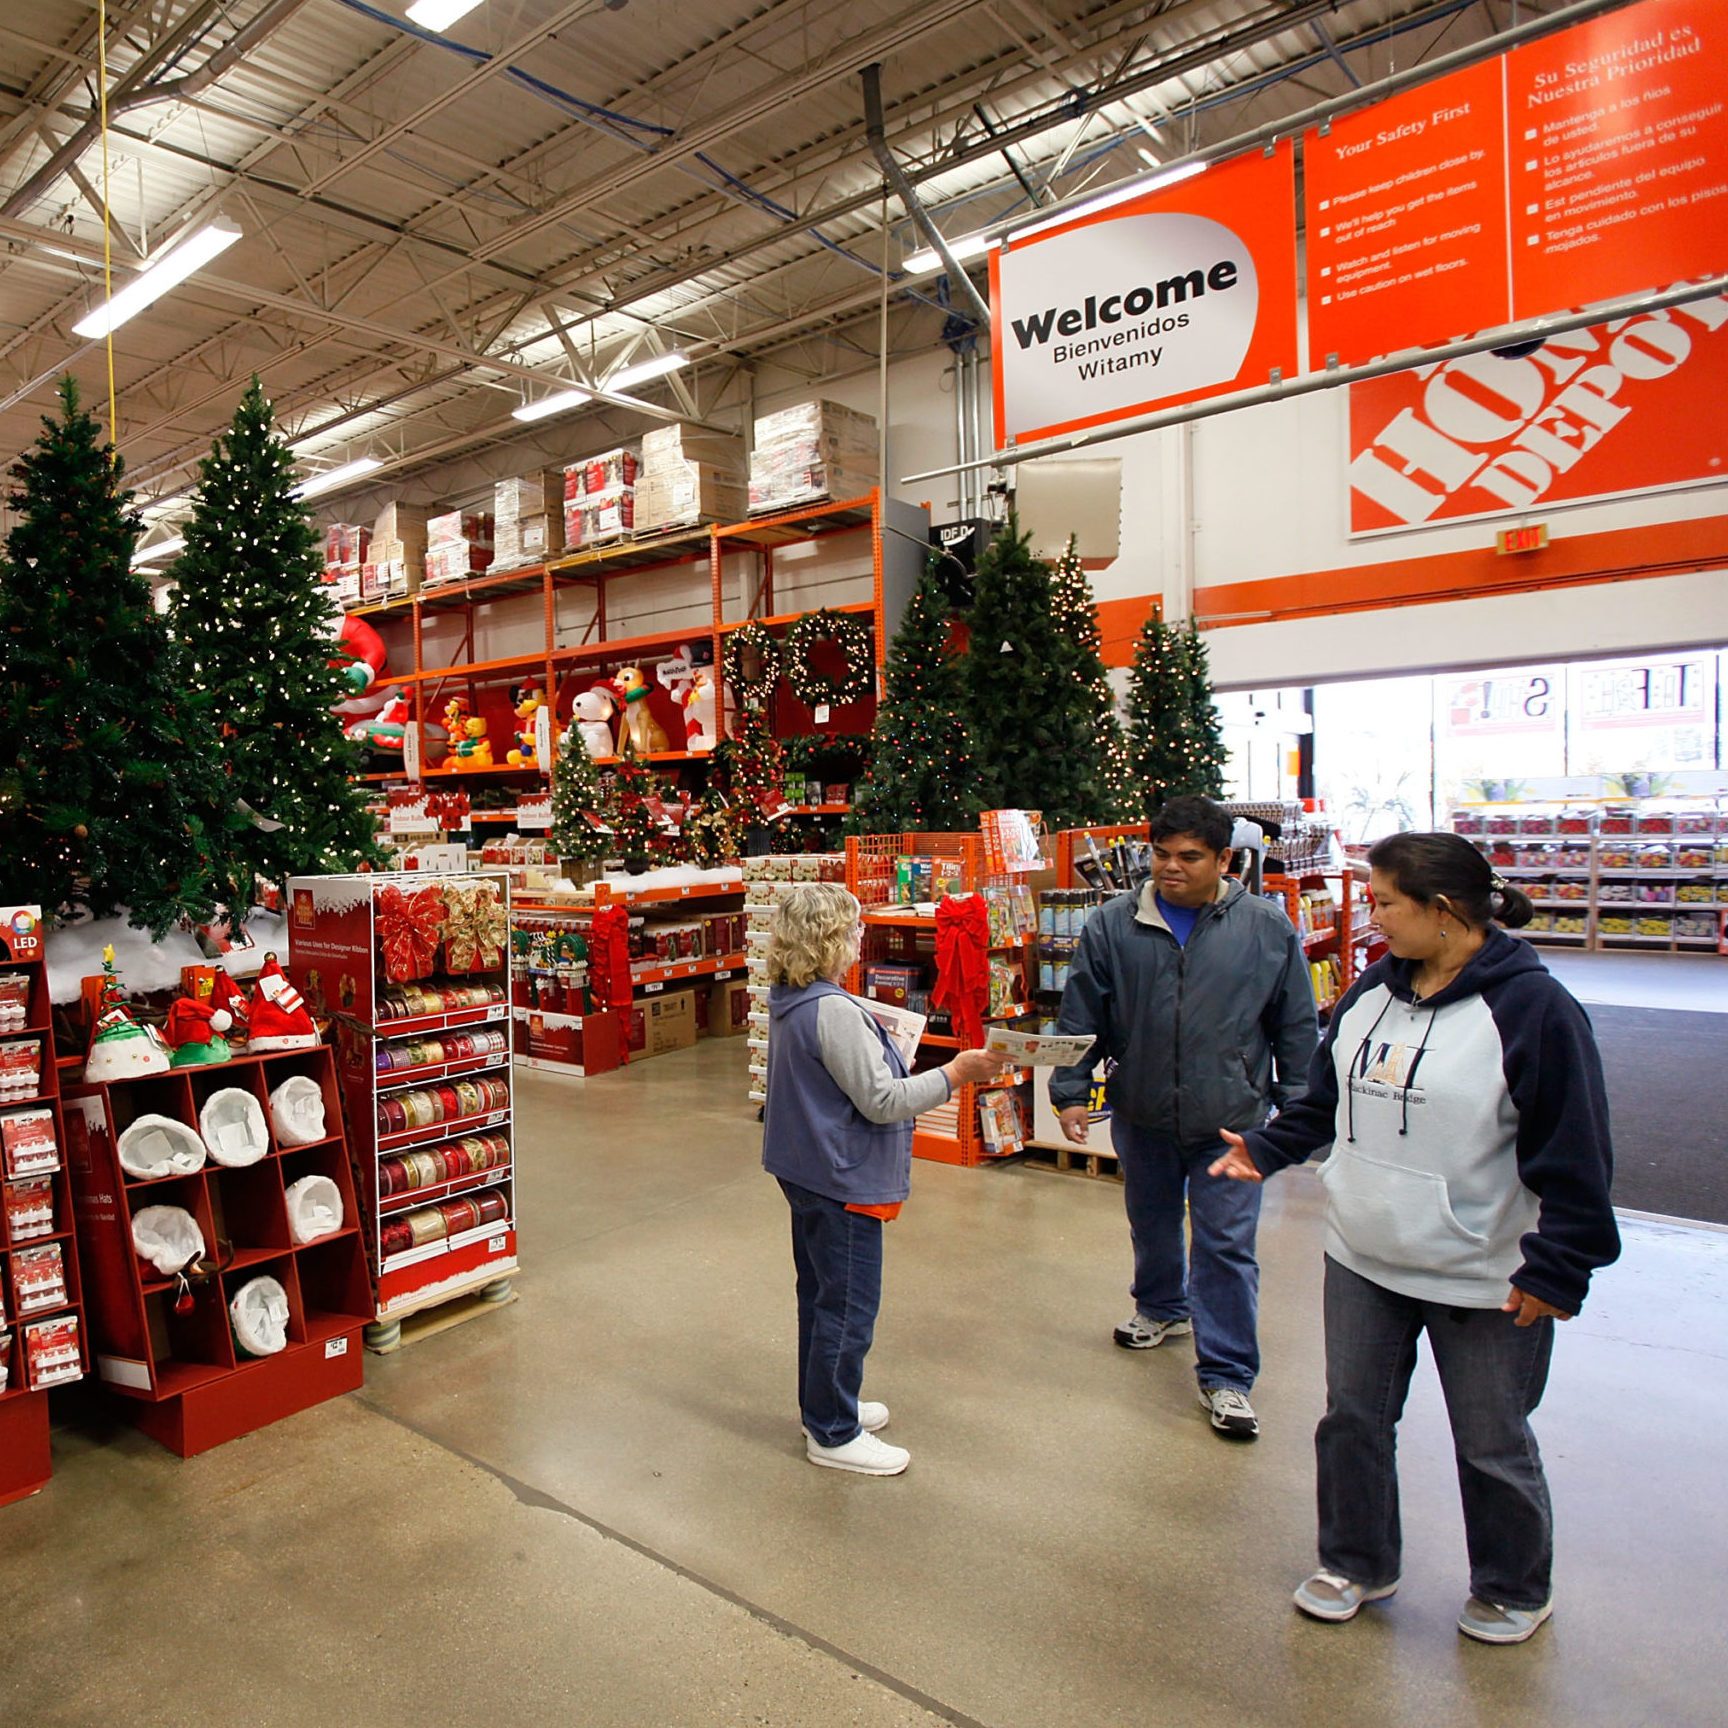 Home Depot Decorations - Home Decorators Collection Home Decor The Home Depot : Helping doers in their home improvement projects.